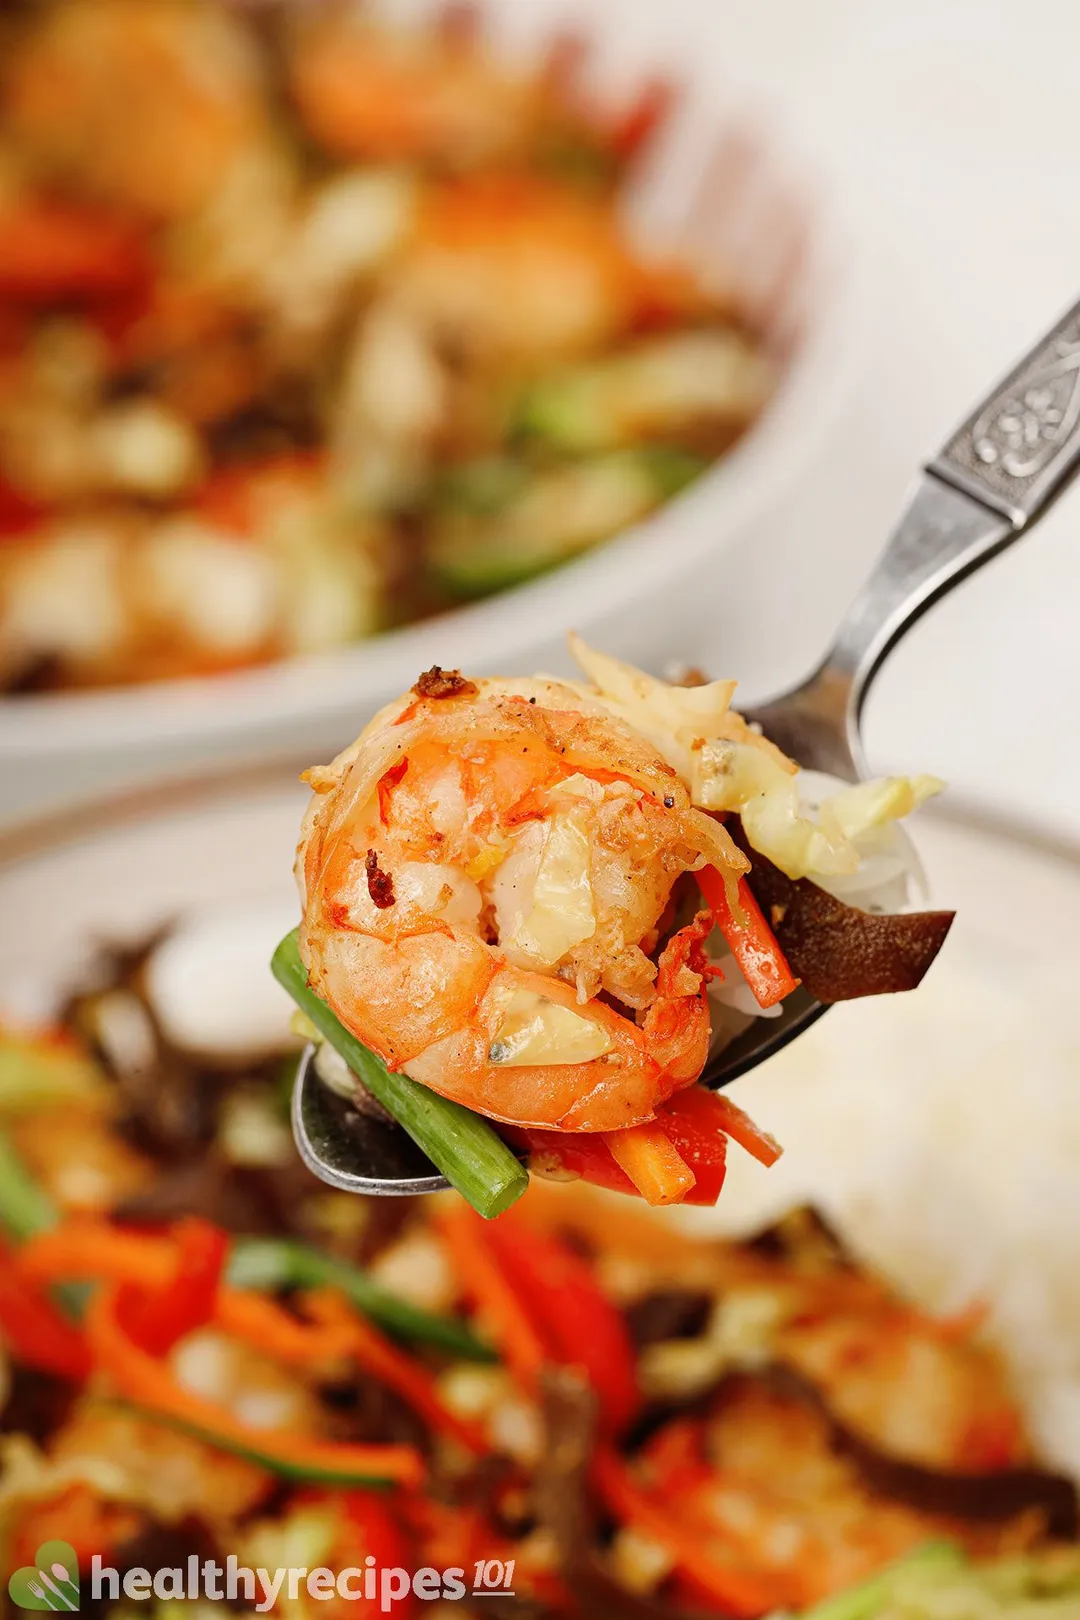 A spoon holding a piece of cooked shrimp, with colorful plates of vegetable saute in the background